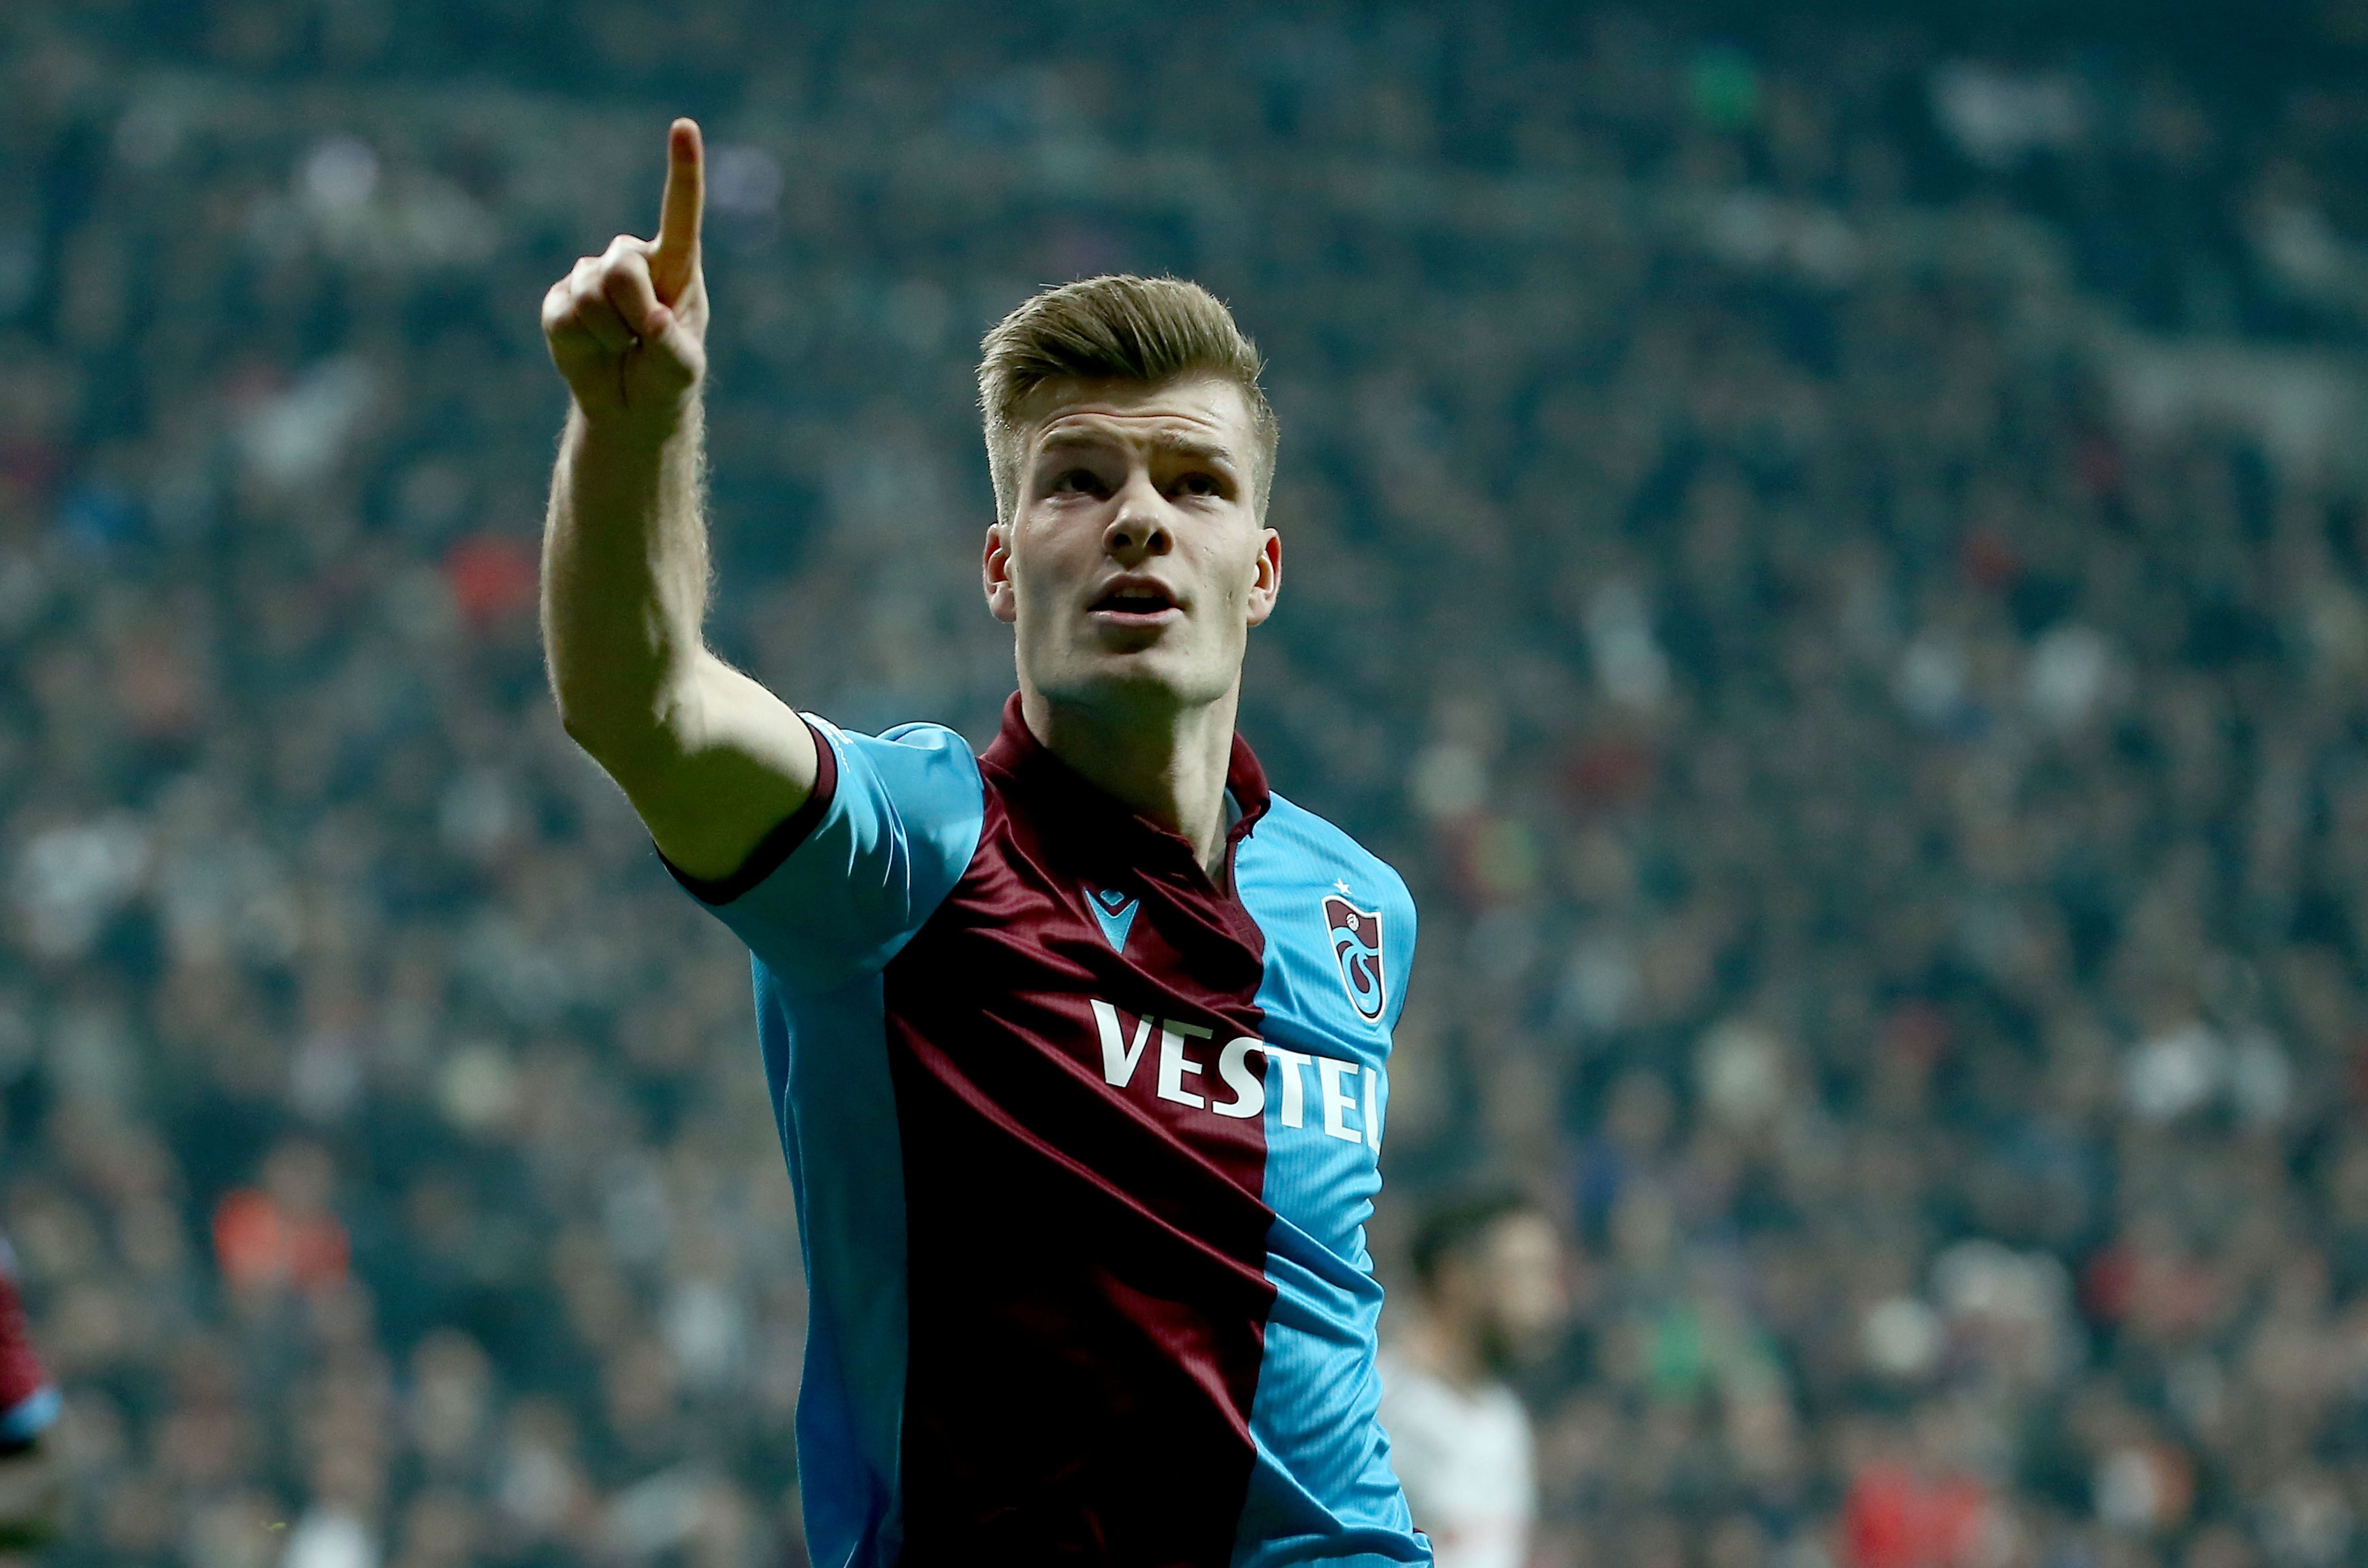 Man Utd send scouts to watch Crystal Palace flop striker Alexander Sorloth at Trabzonspor after Haaland misery